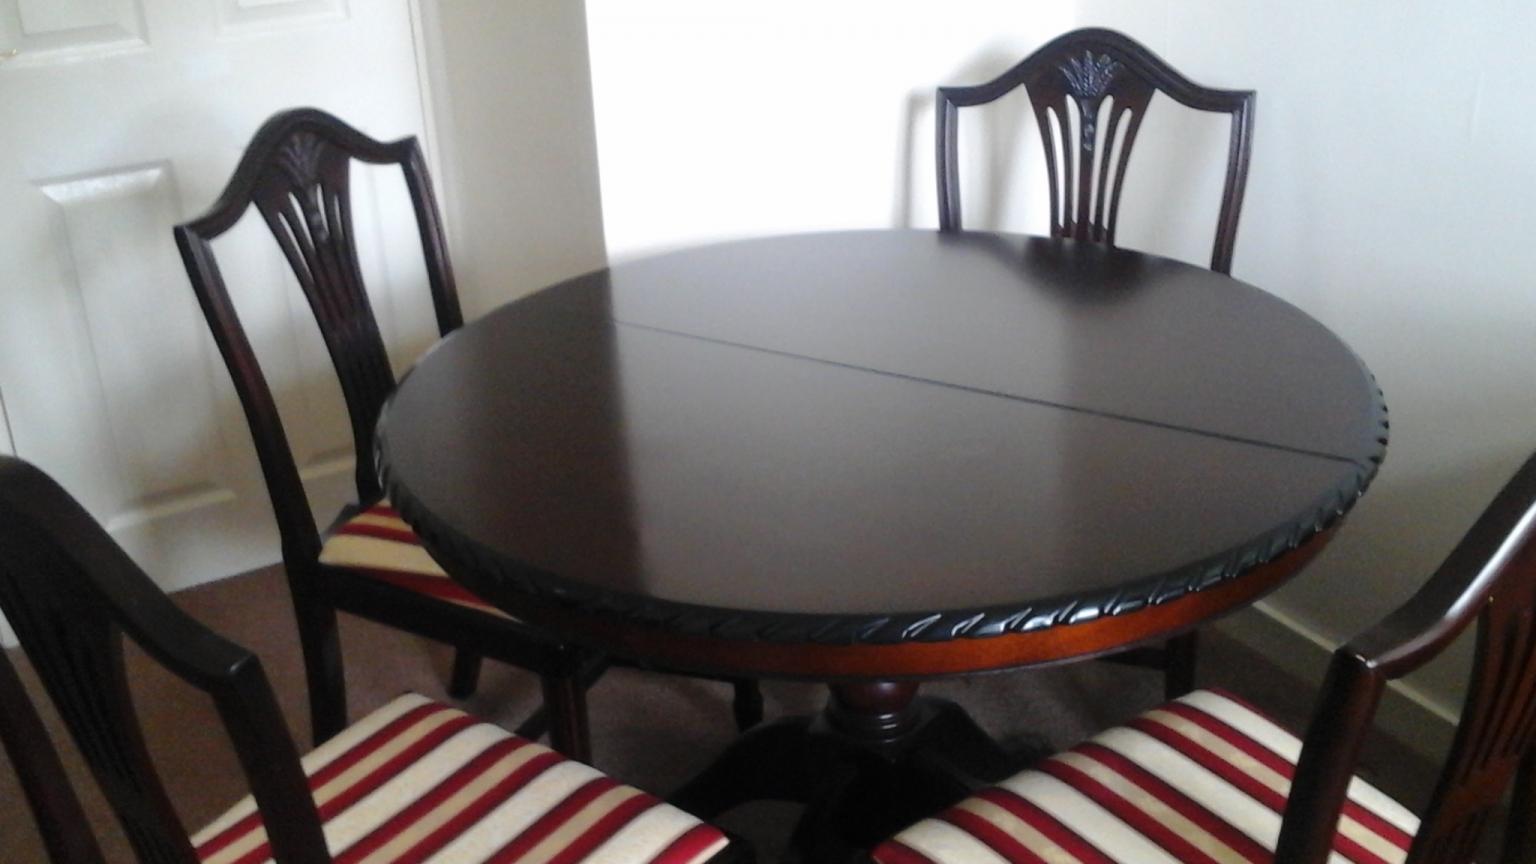 Traditional Wood Ext Dining Table 4 Chairs In B73 Birmingham Fur 70 00 Zum Verkauf Shpock At